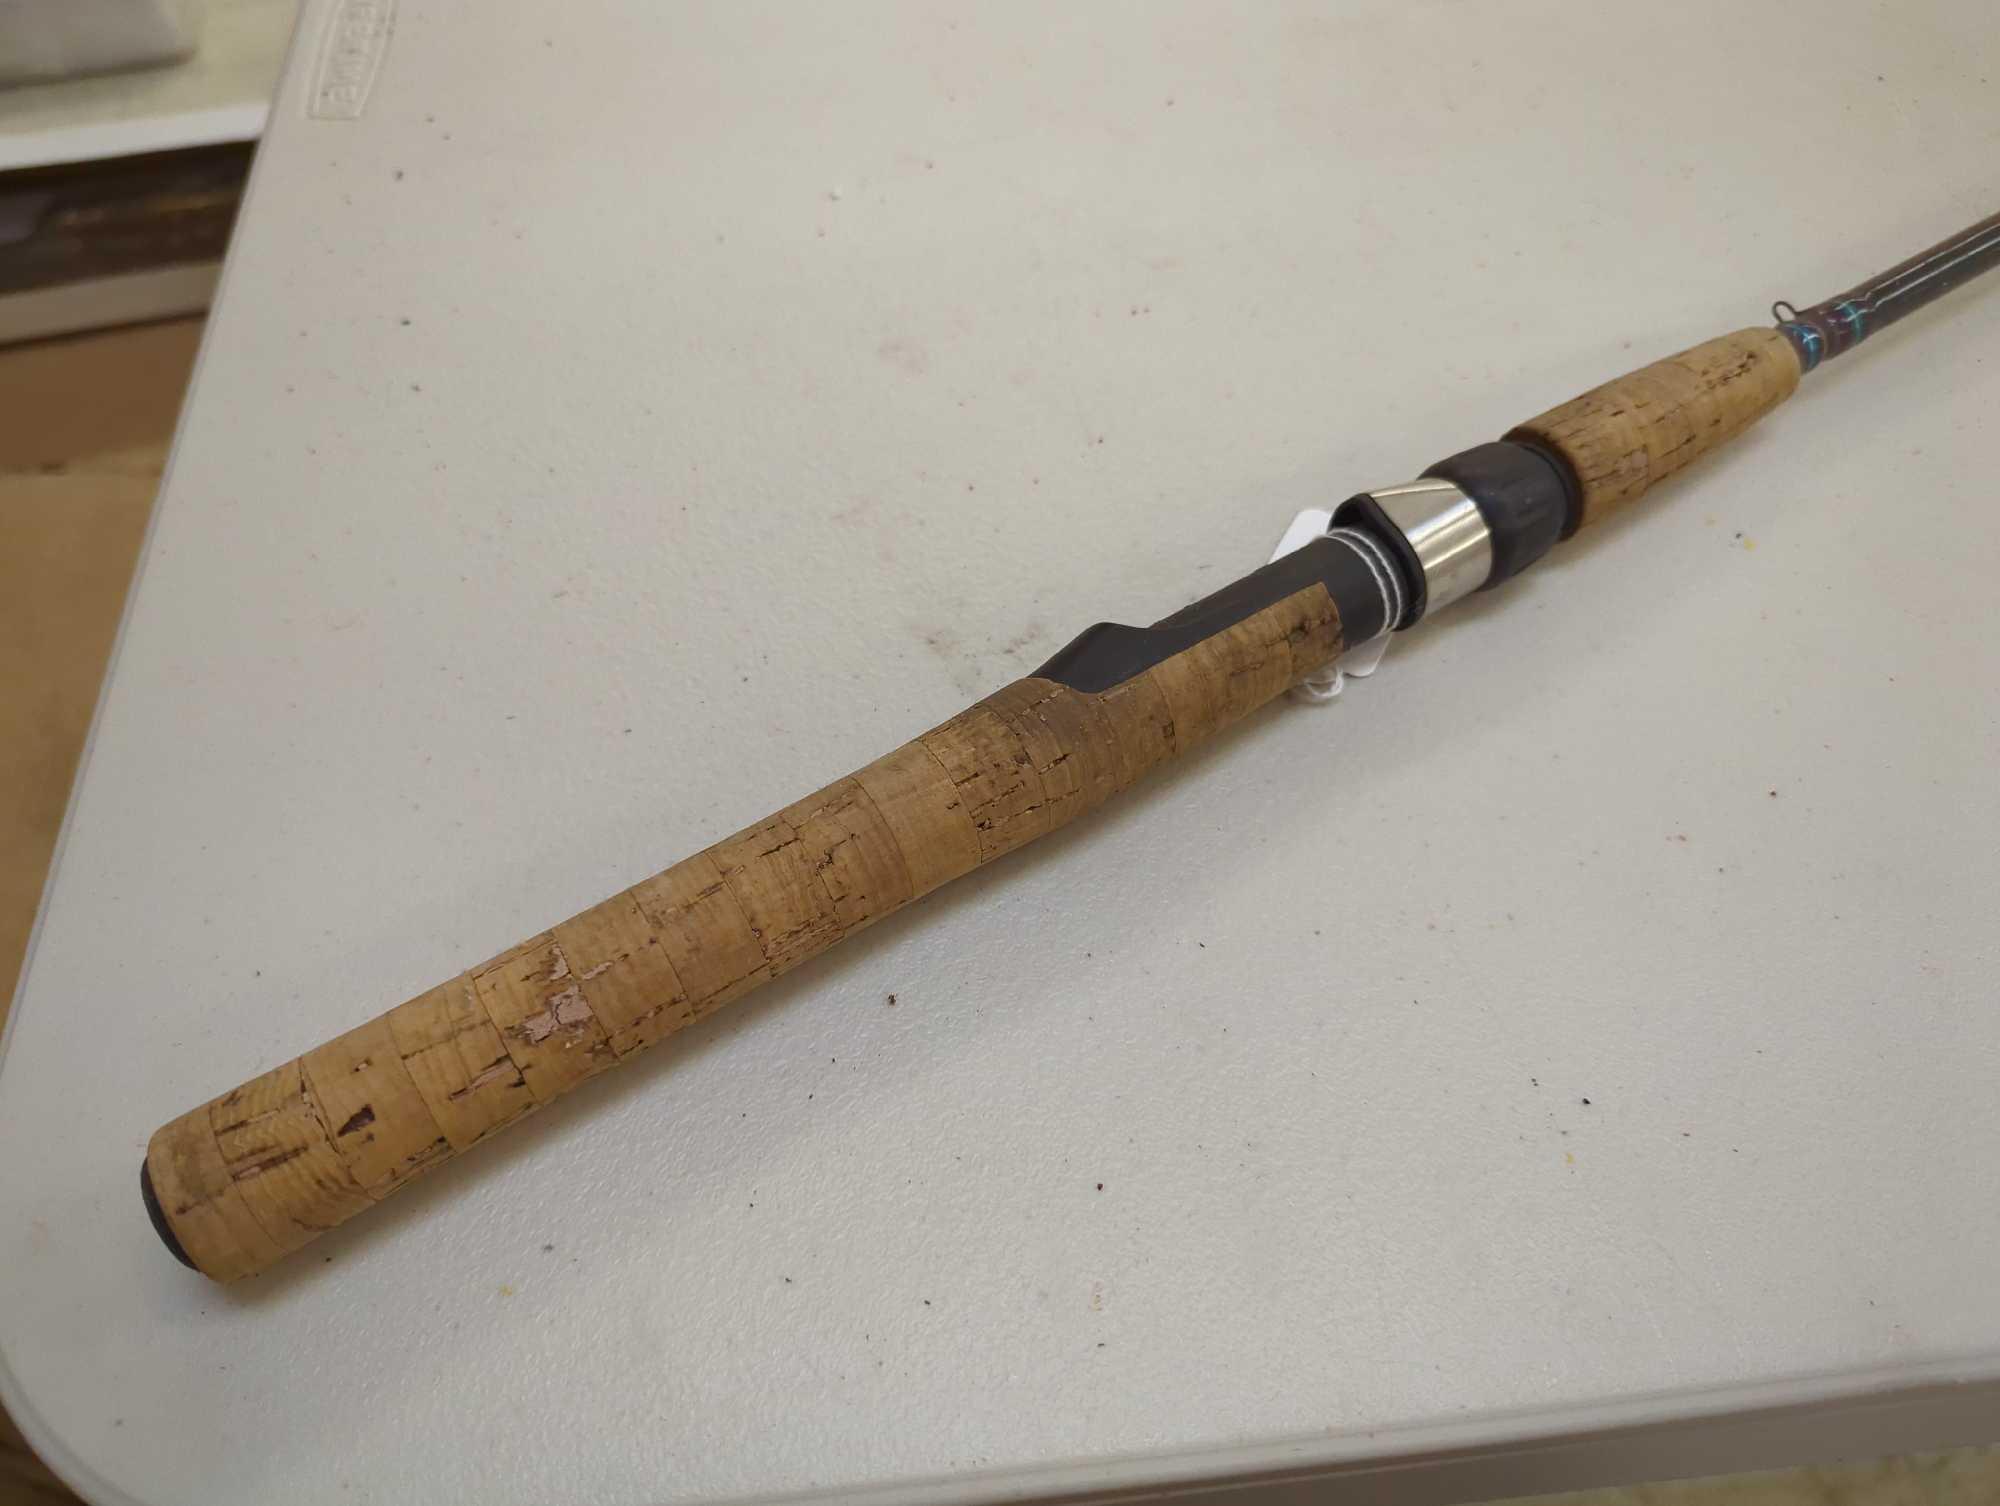 Fenwick 6' venture fishing rod. Line 4- 12 lb Lure 1/8-3/8 oz Comes as it's shown in photos. Appears